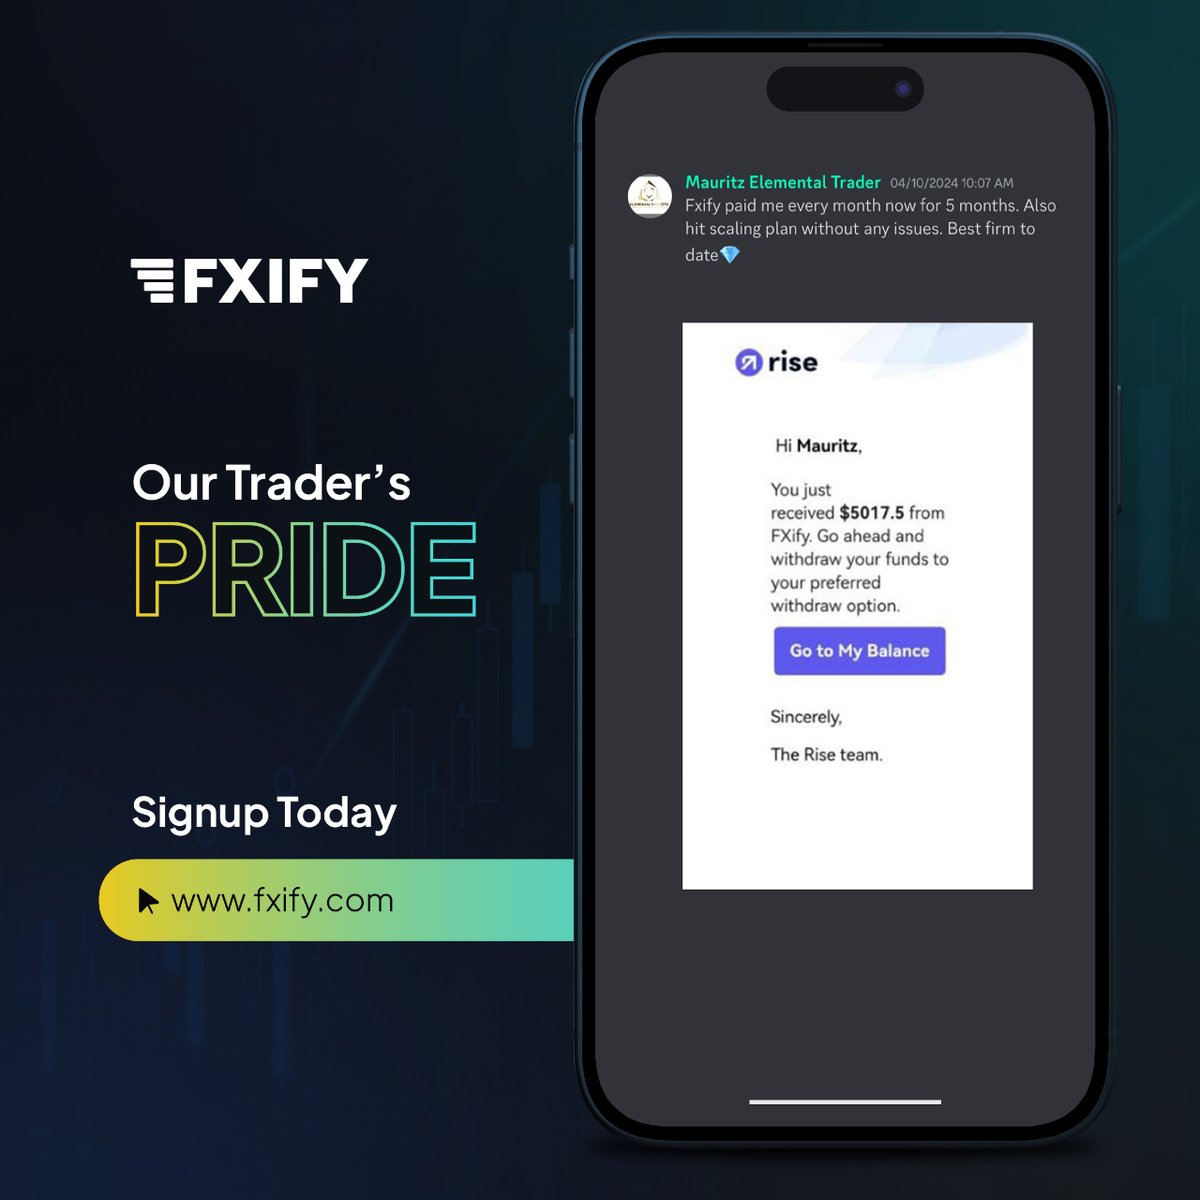 Do you want to experience the same success? If you have the skills and the hunger, we can fuel your success. See real payout proofs from our traders on our Discord community today! 👉discord.gg/fxify